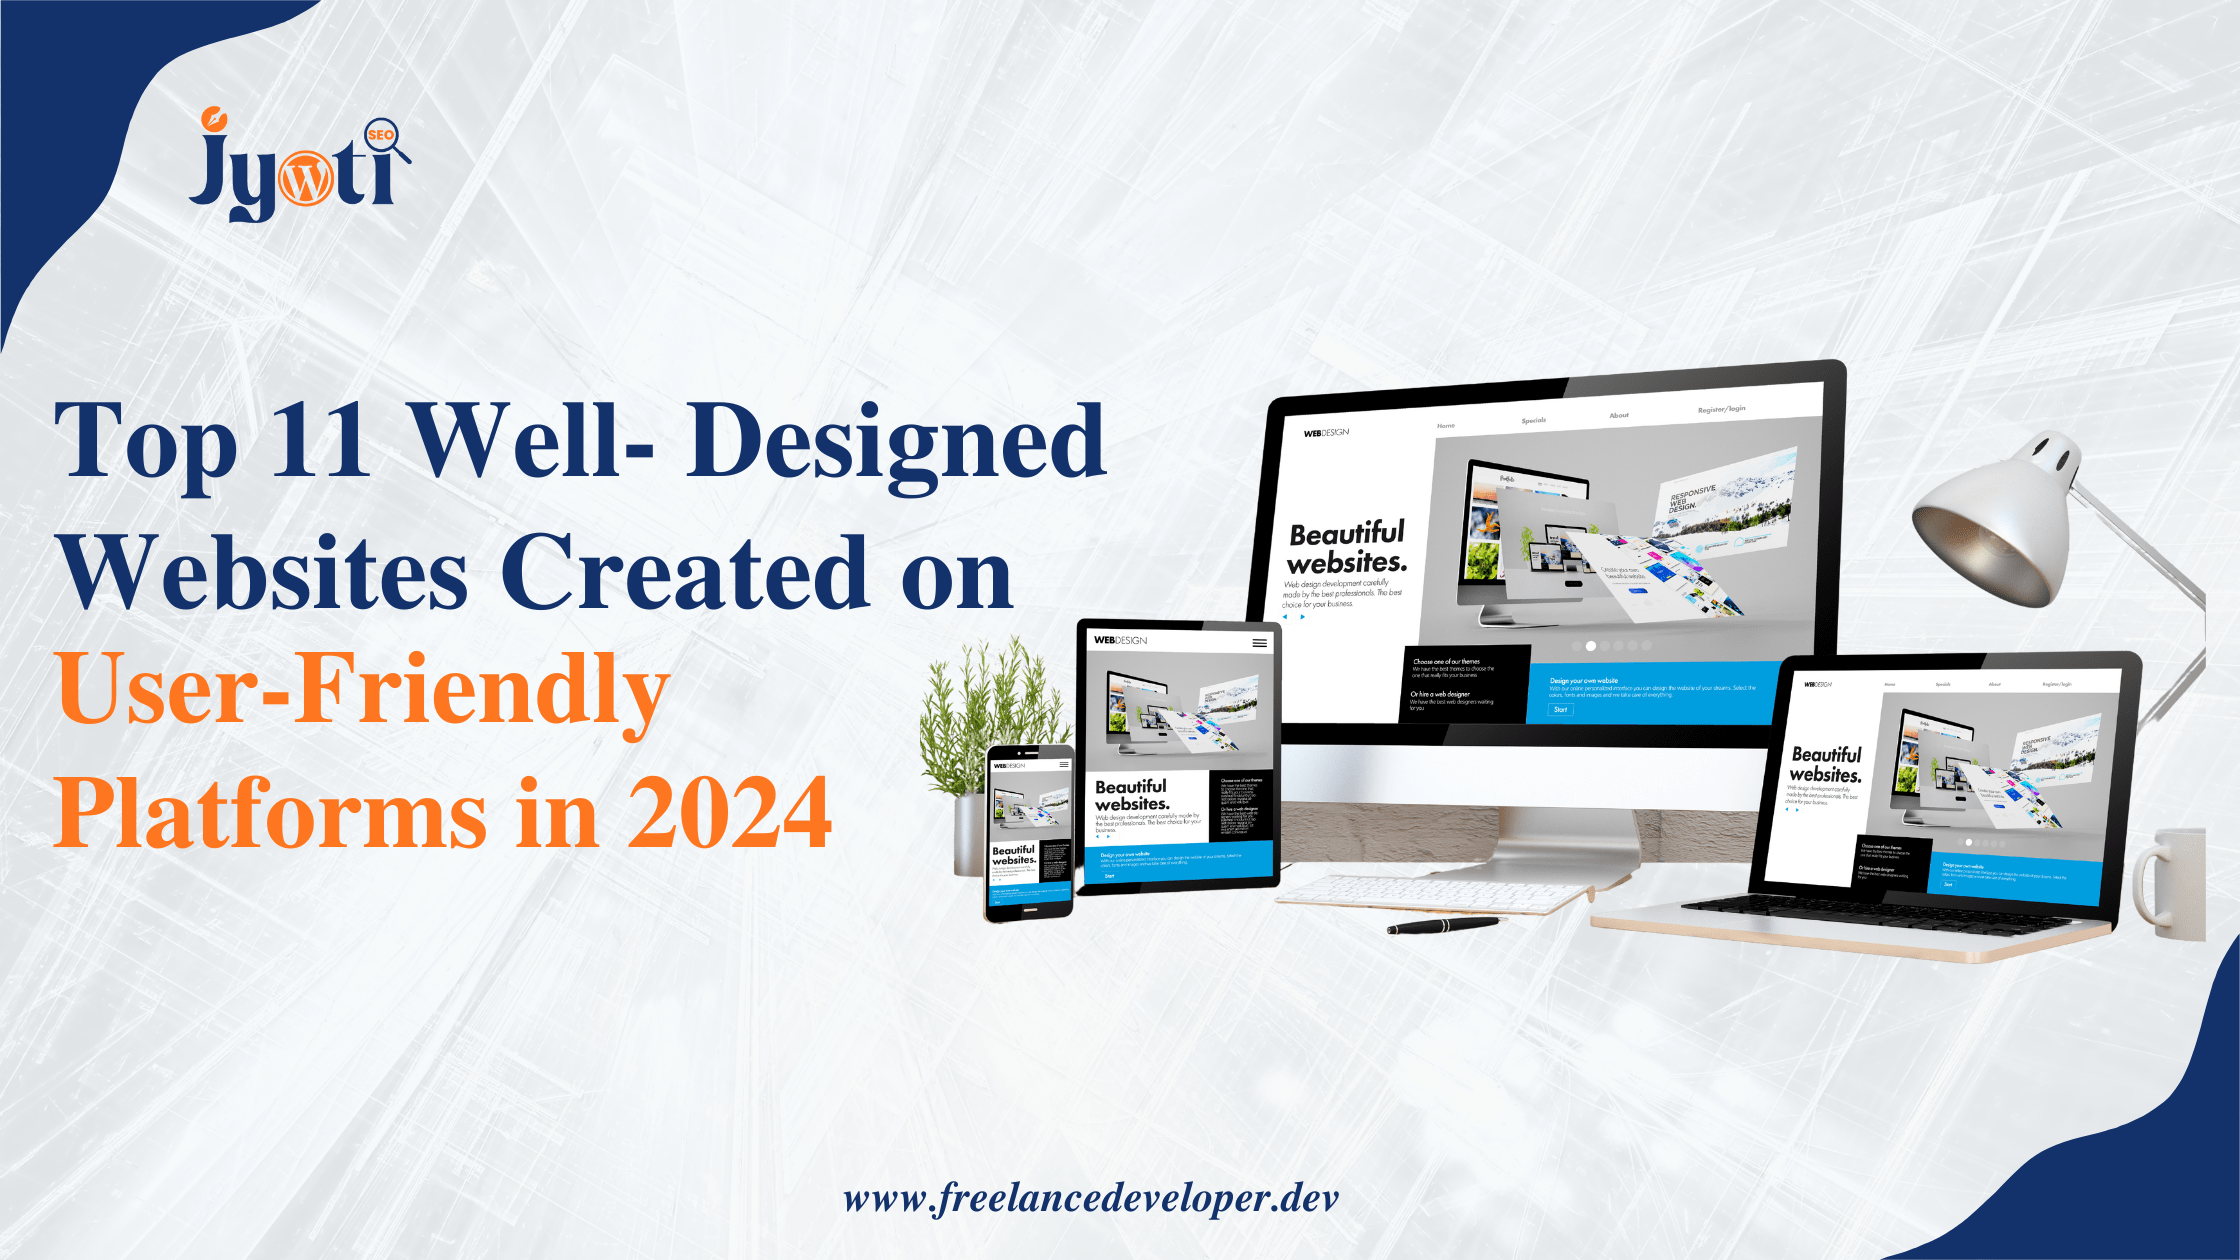 Top 11 Well- Designed Websites Created on User-Friendly Platforms in 2024